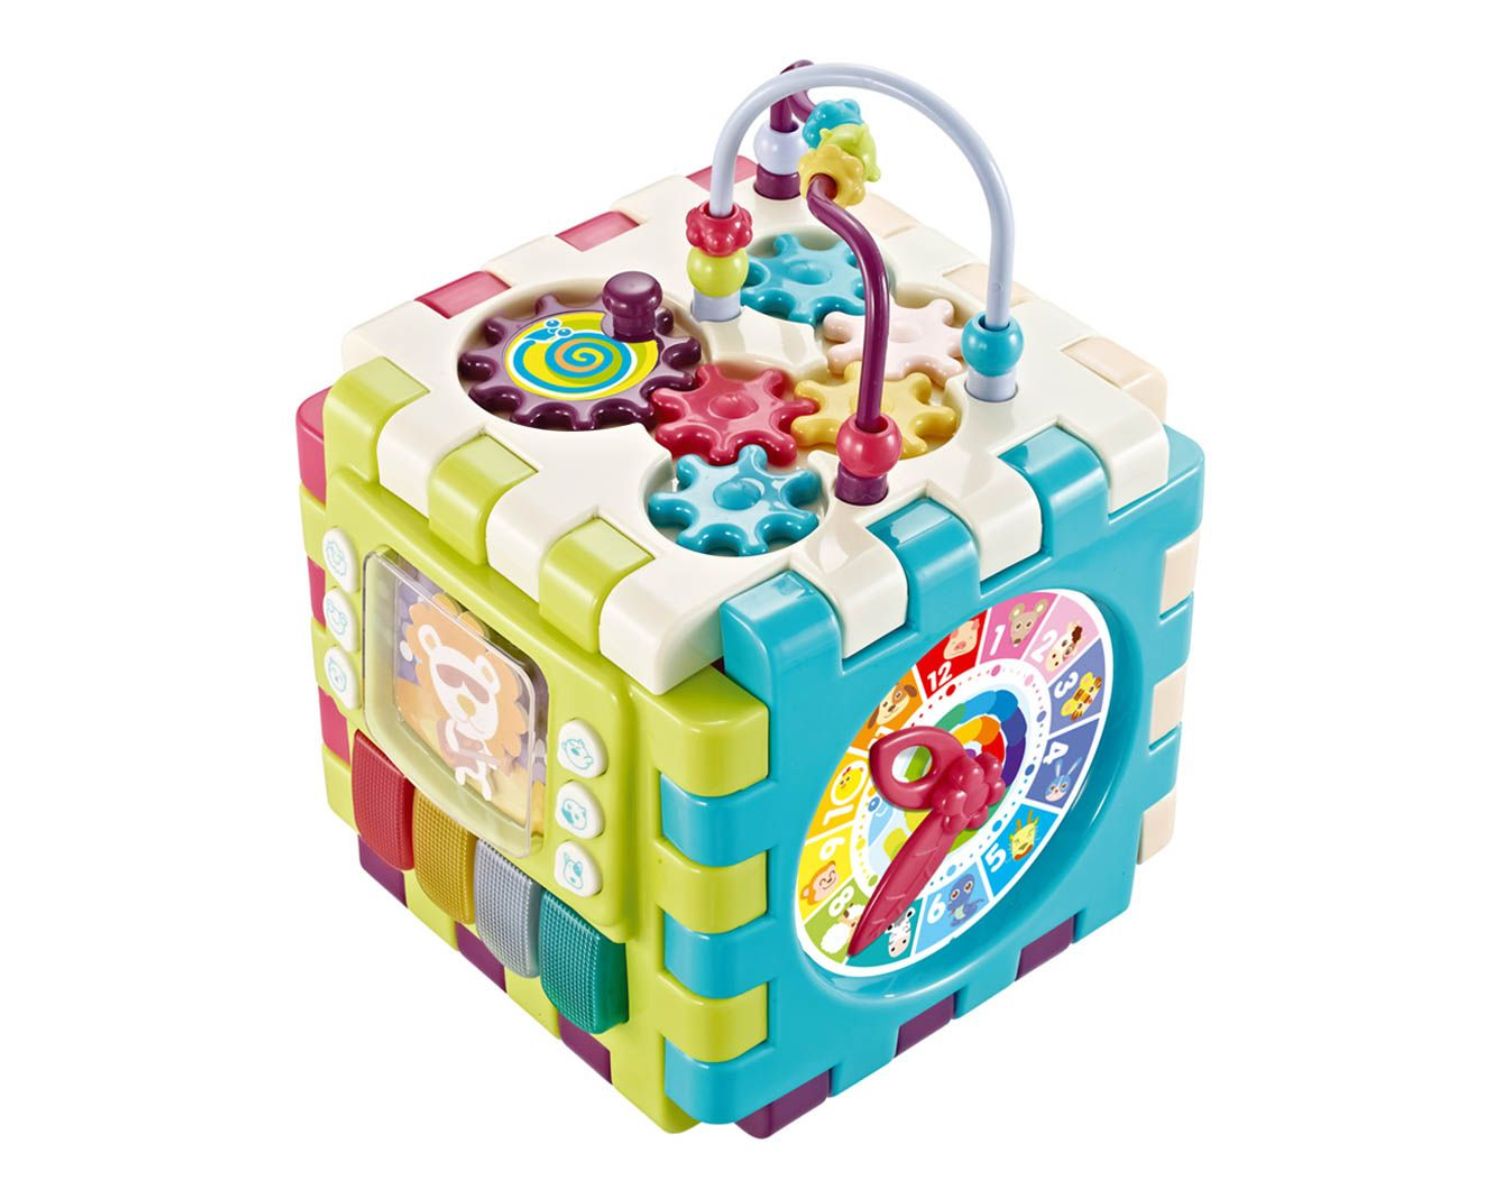 Baby Activity Cube Review: Fun and Educational Toy for Infants